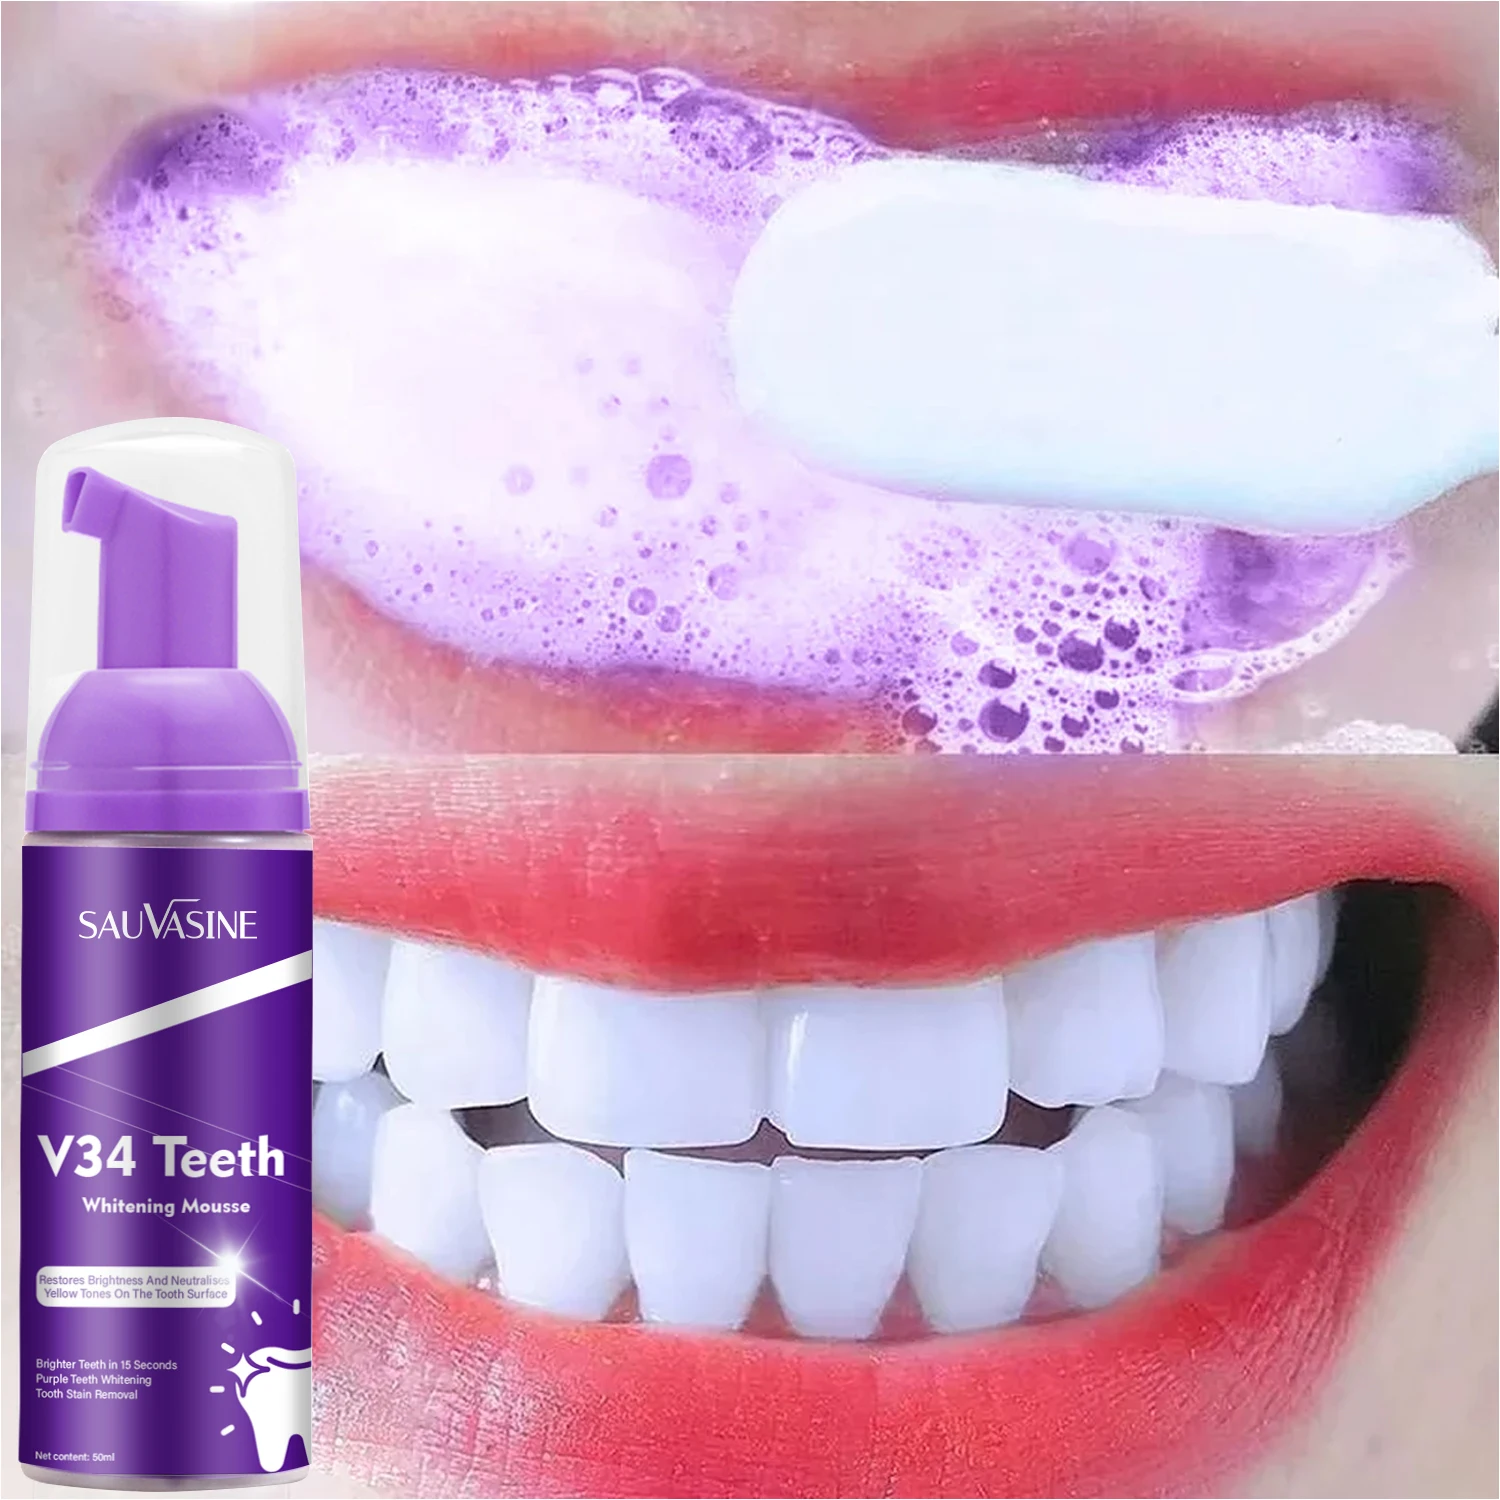 Teeth Whitening Product Effectively Remove Yellow Teeth Smoke Stain Remover Oral Hygiene Clean Dental Plaque Fresh Breath teeth whitening powder hygiene whiten teeth remove breath stains hygiene dental tools plaque z5r6